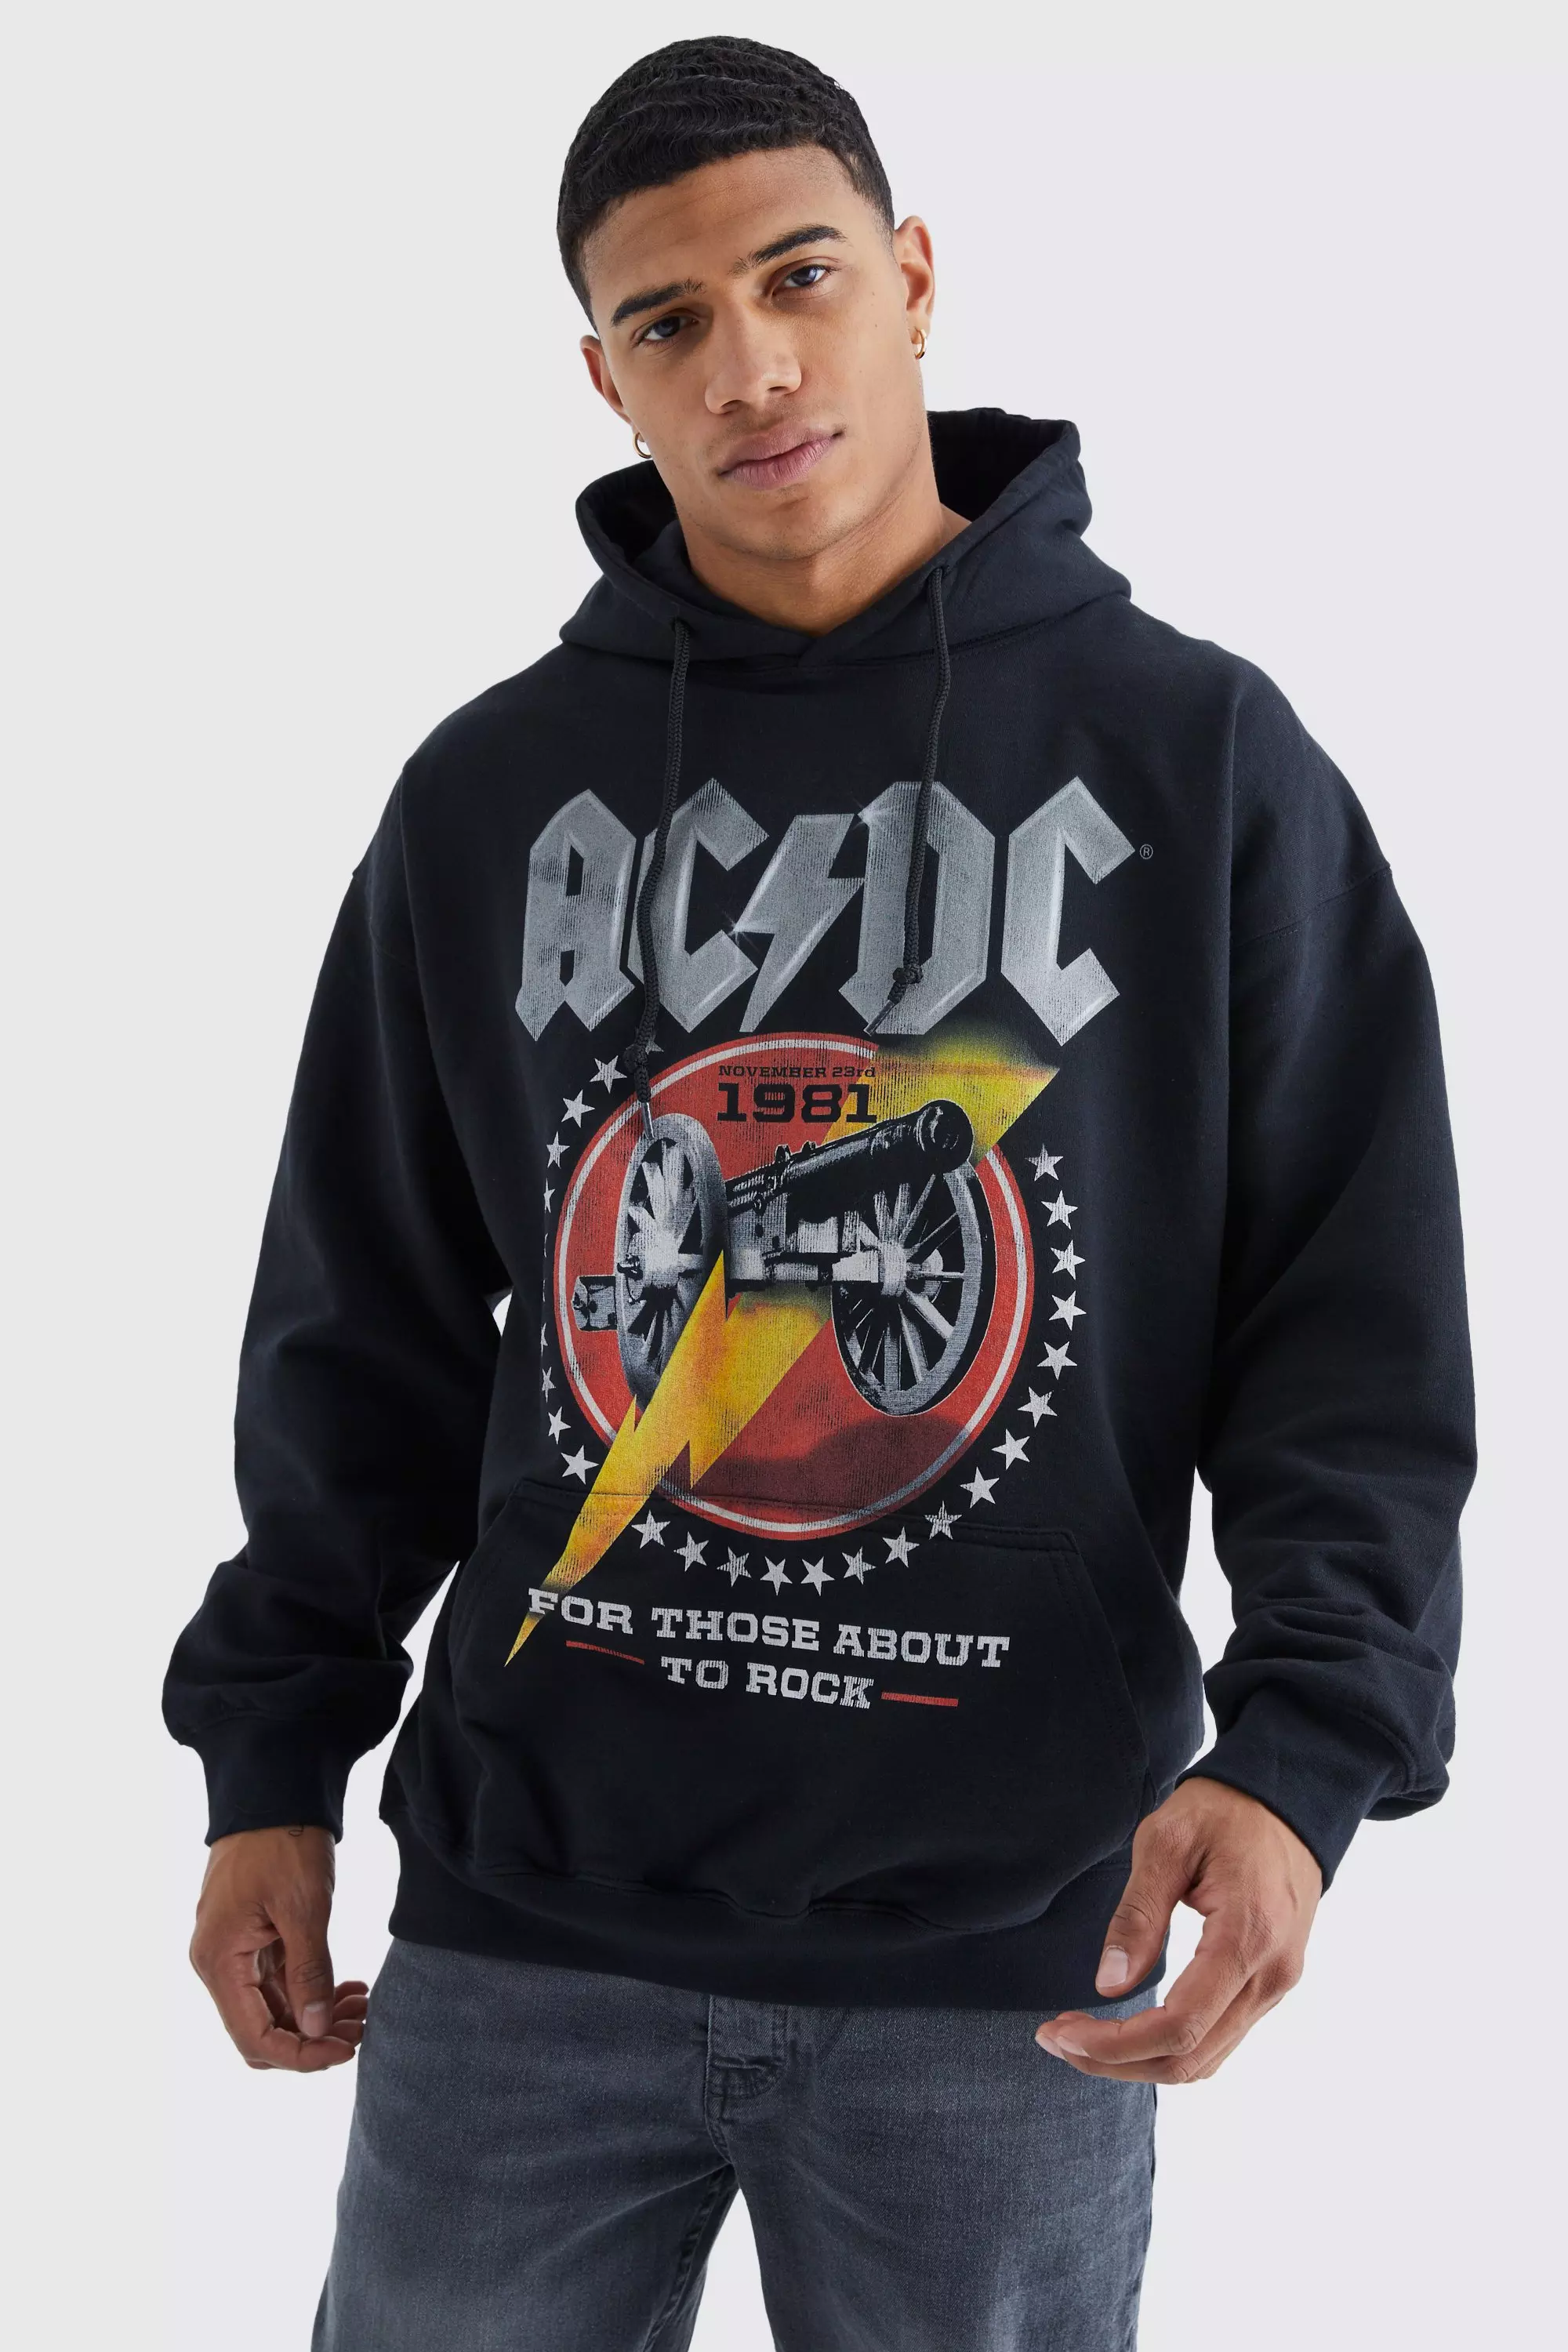 Oversized ACDC Canon License Hoodie Black